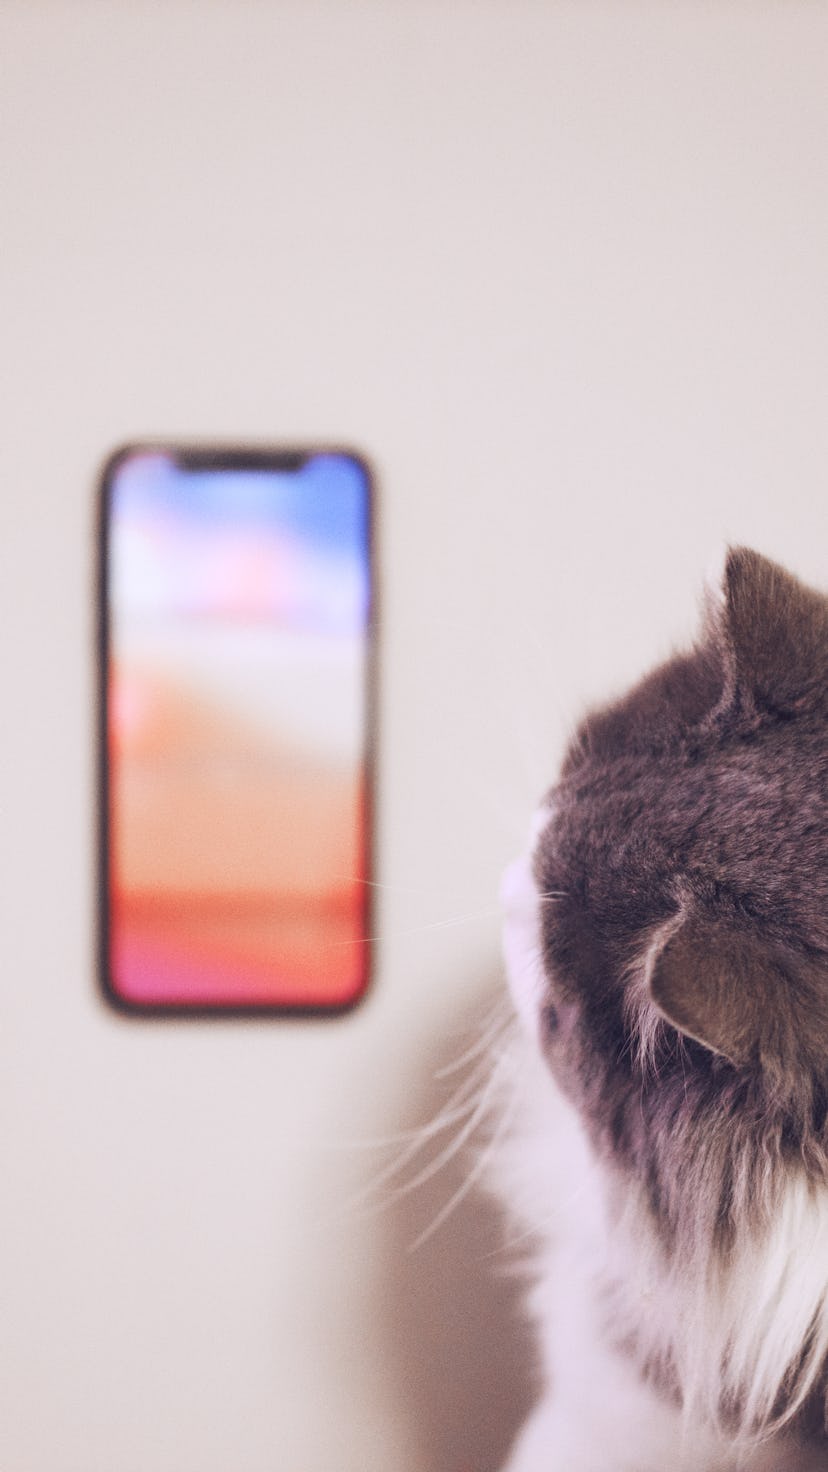 A cat looks at a locked iPhone screen.